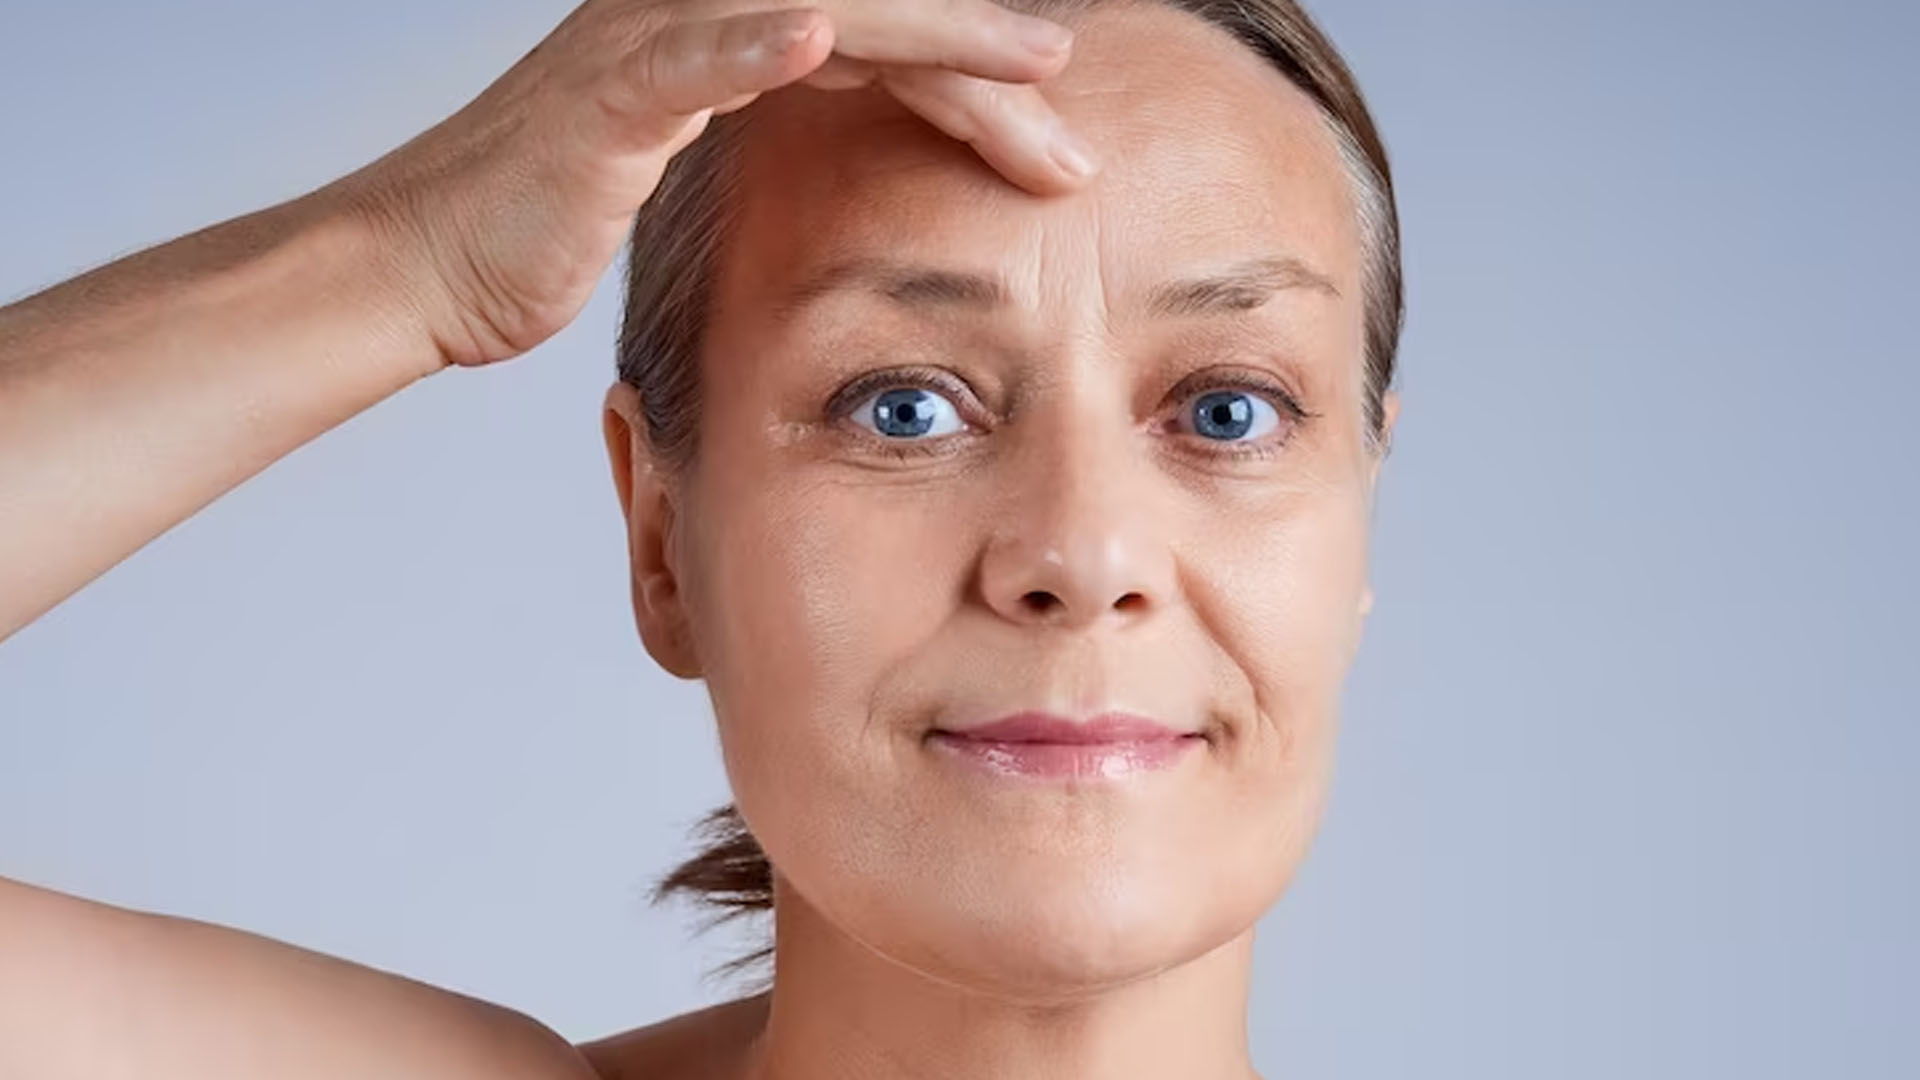 What are the Home Remedies for Eye Wrinkles?